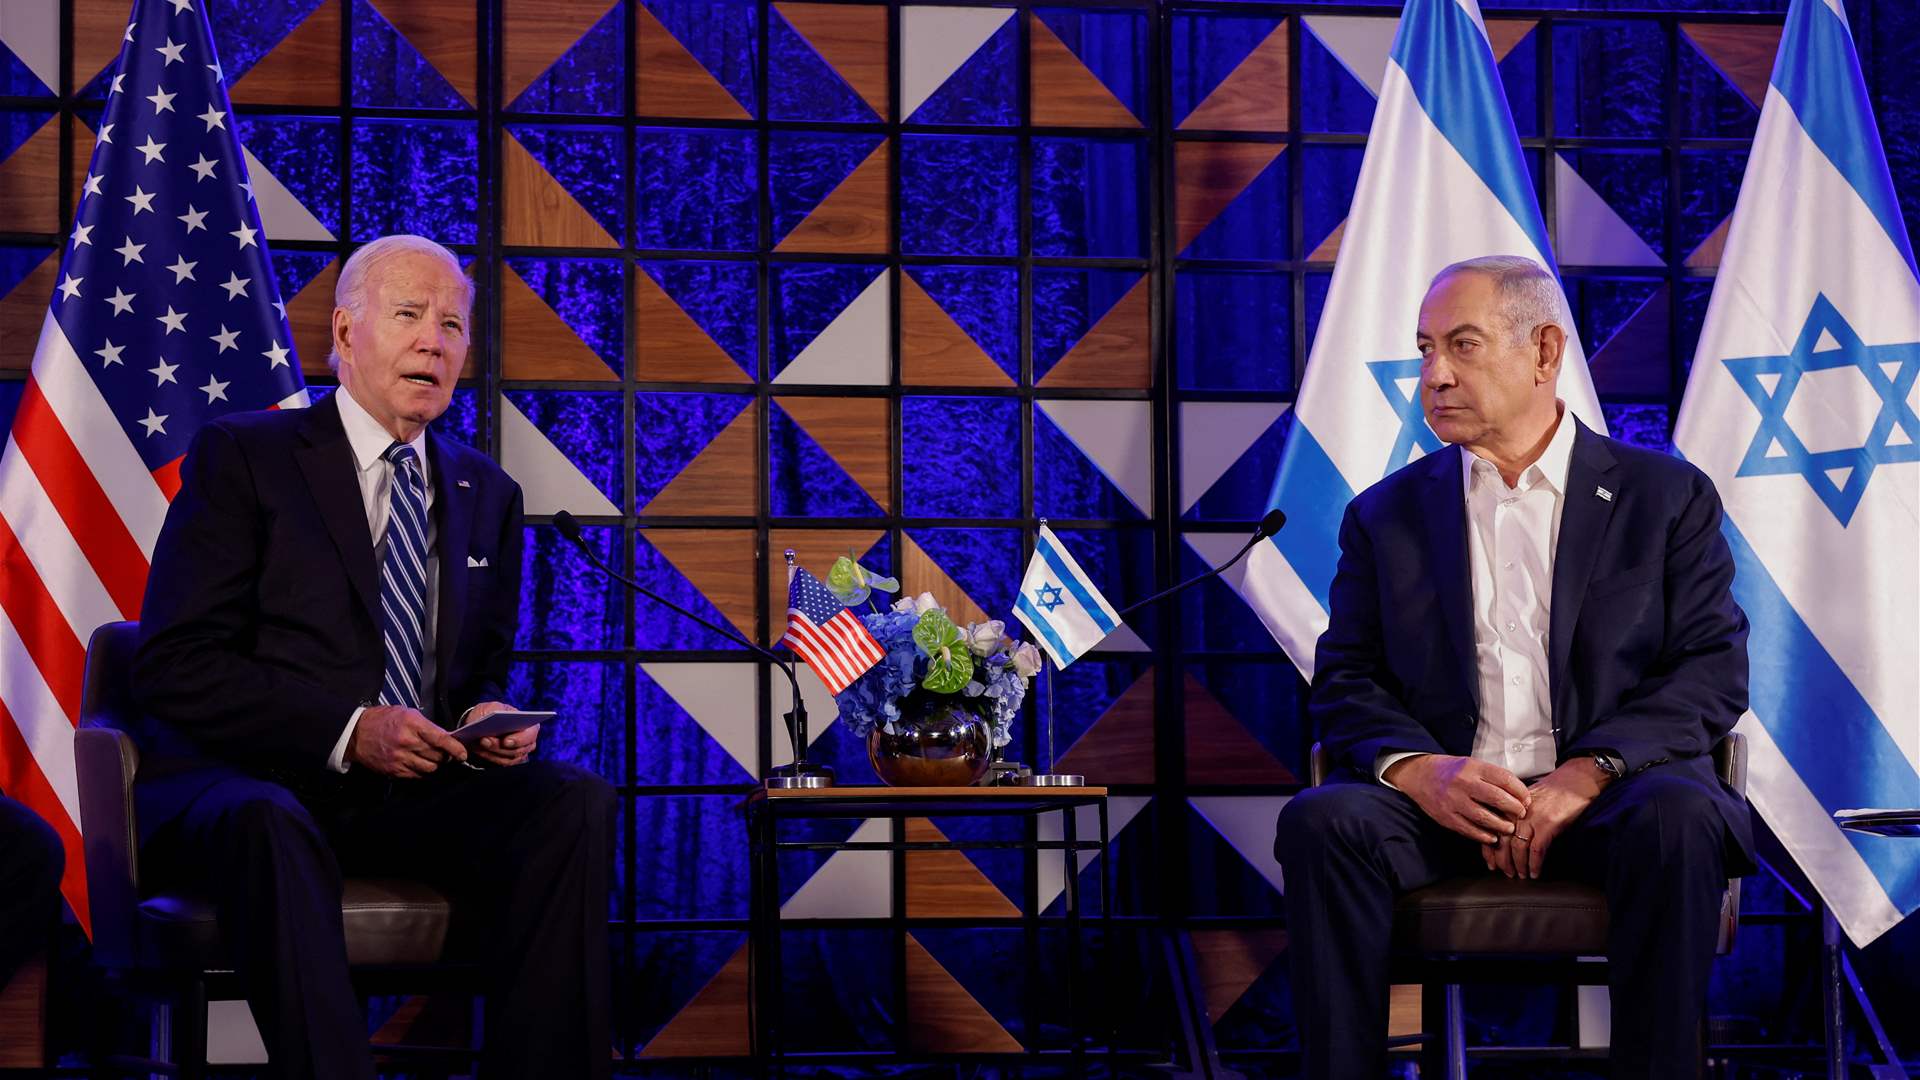 Biden on Gaza hospital bombing: It appears that it was done by the other team, not Israel